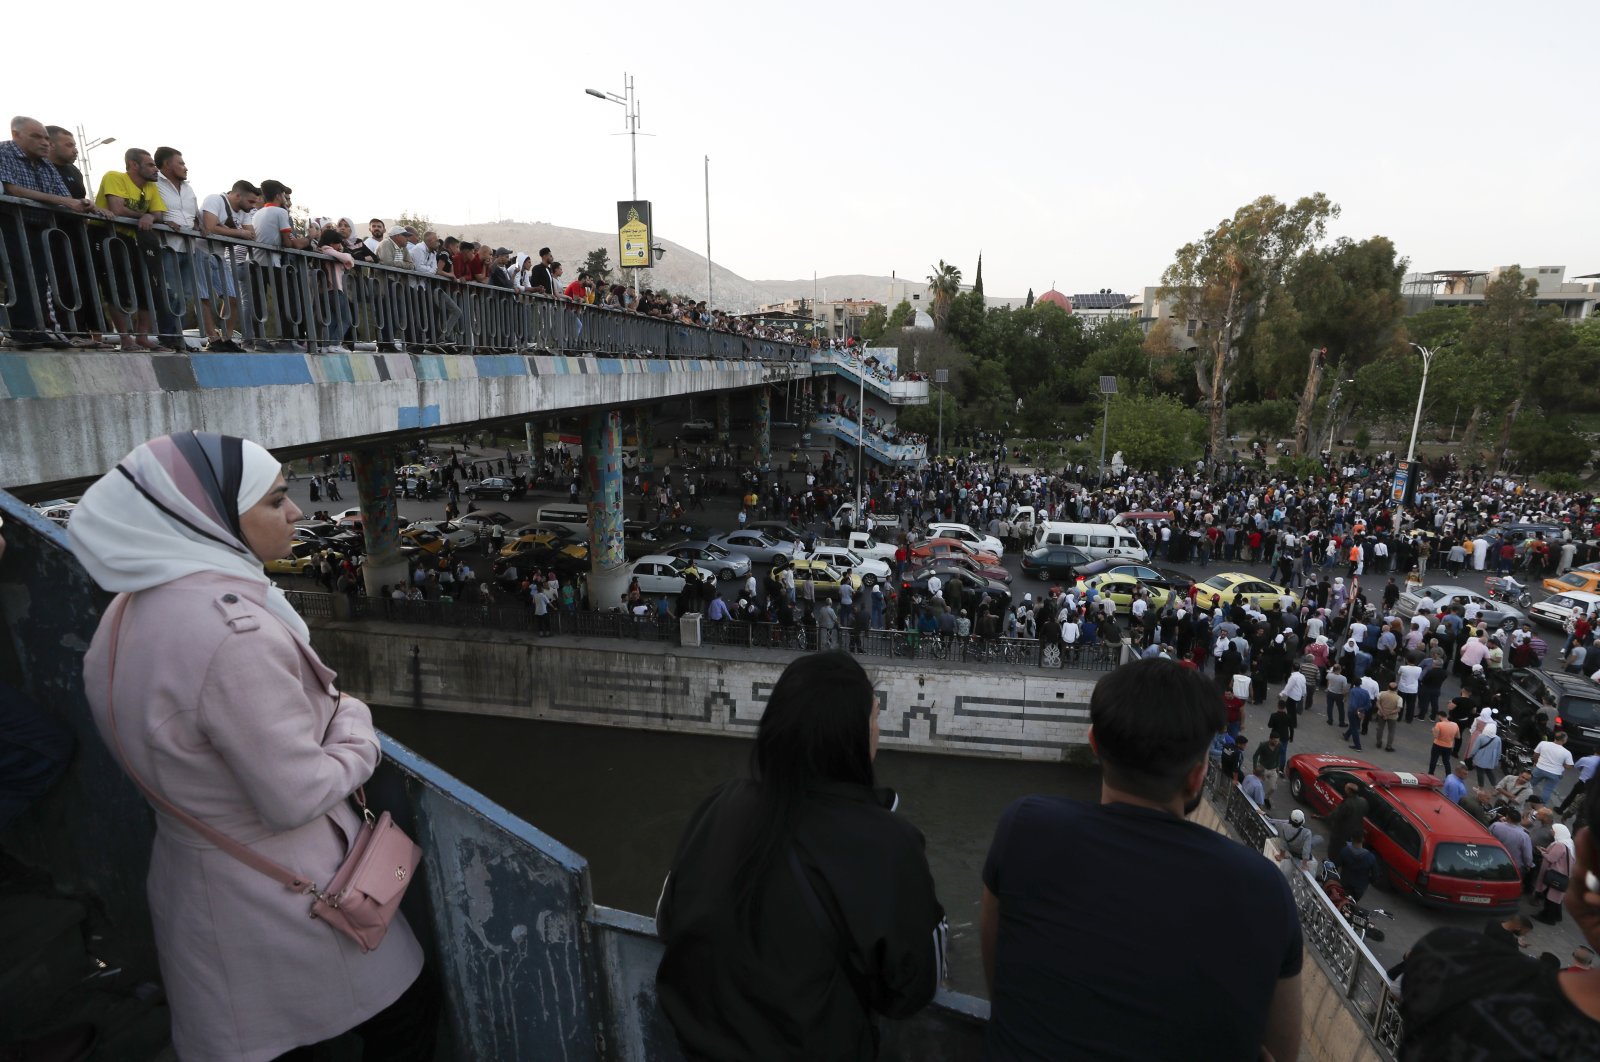 Dozens of Syrians wait at the President&#039;s Bridge in Damascus for relatives they hope would be among those released from prison, Syria, May 3, 2022. (AP Photo)